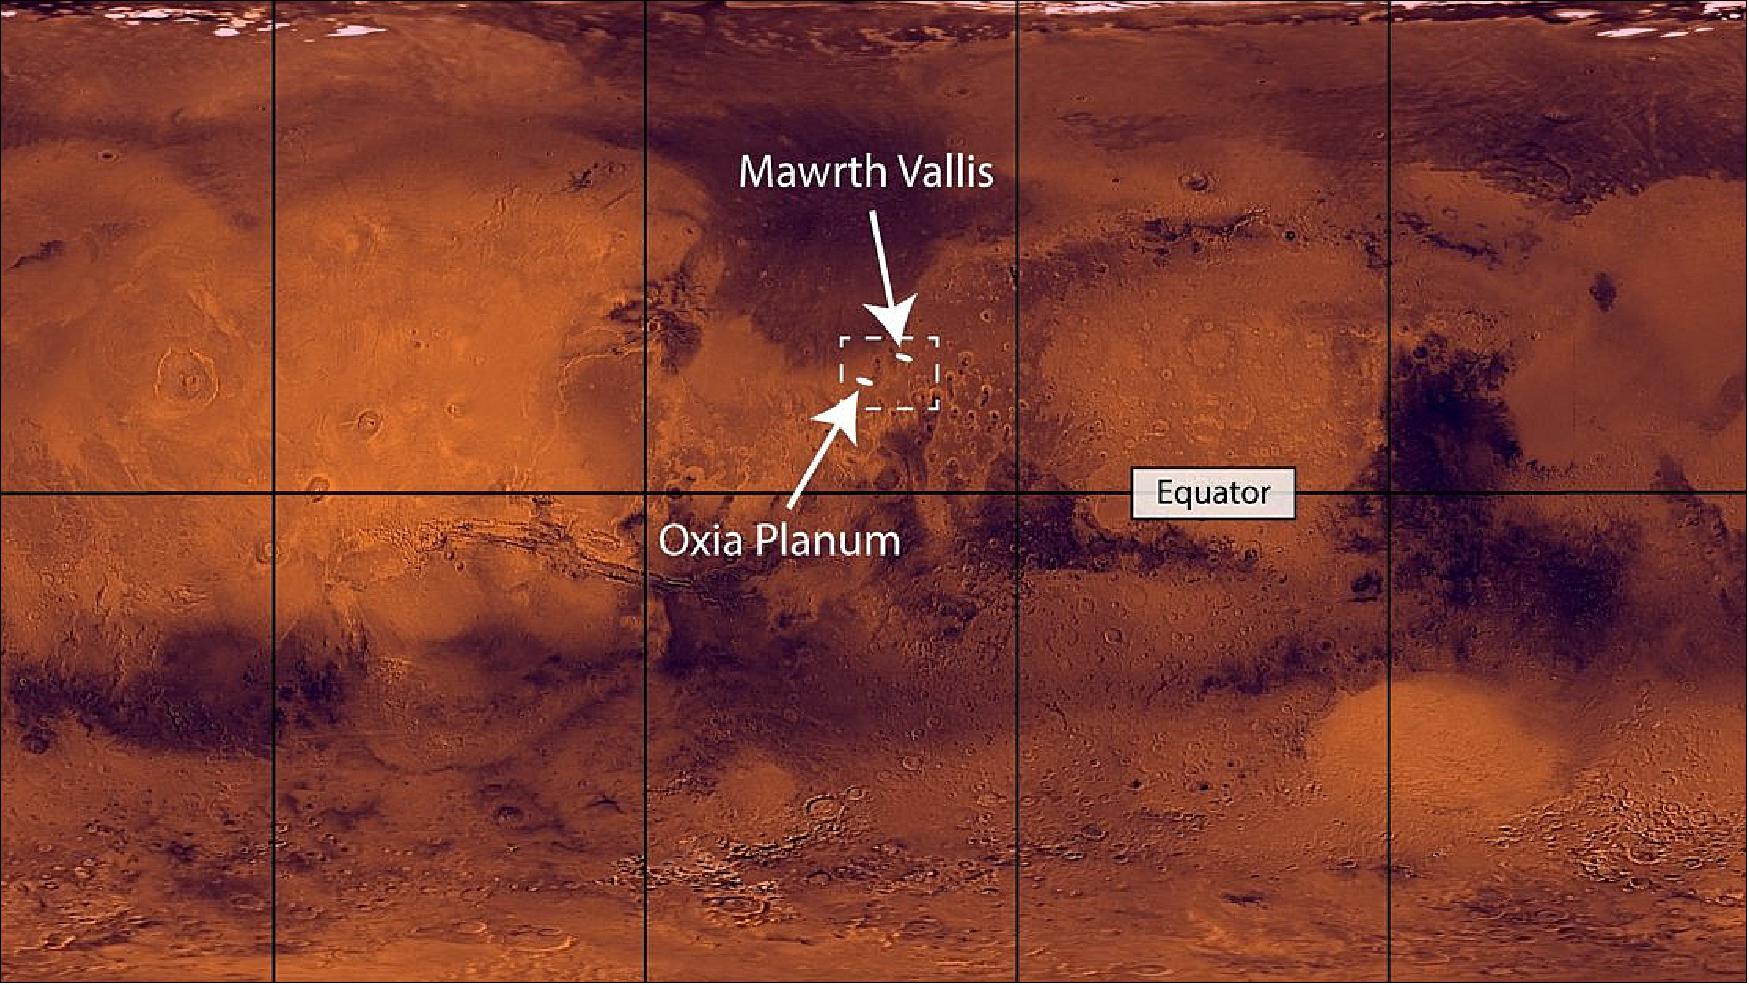 Figure 84: The two candidates for the landing site of the ESA-Roscosmos rover and surface science platform that will launch to the Red Planet in 2020. Both landing site candidates – Oxia Planum and Mawrth Vallis – preserve a rich record of geological history from the planet’s wetter past billions of years ago. They lie just north of the equator, separated by a few hundred kilometers, in a region with many channels cutting through from the southern highlands to the northern lowlands. -The background used in this image is from NASA’s Viking orbiters (image credit: NASA/JPL/USGS)